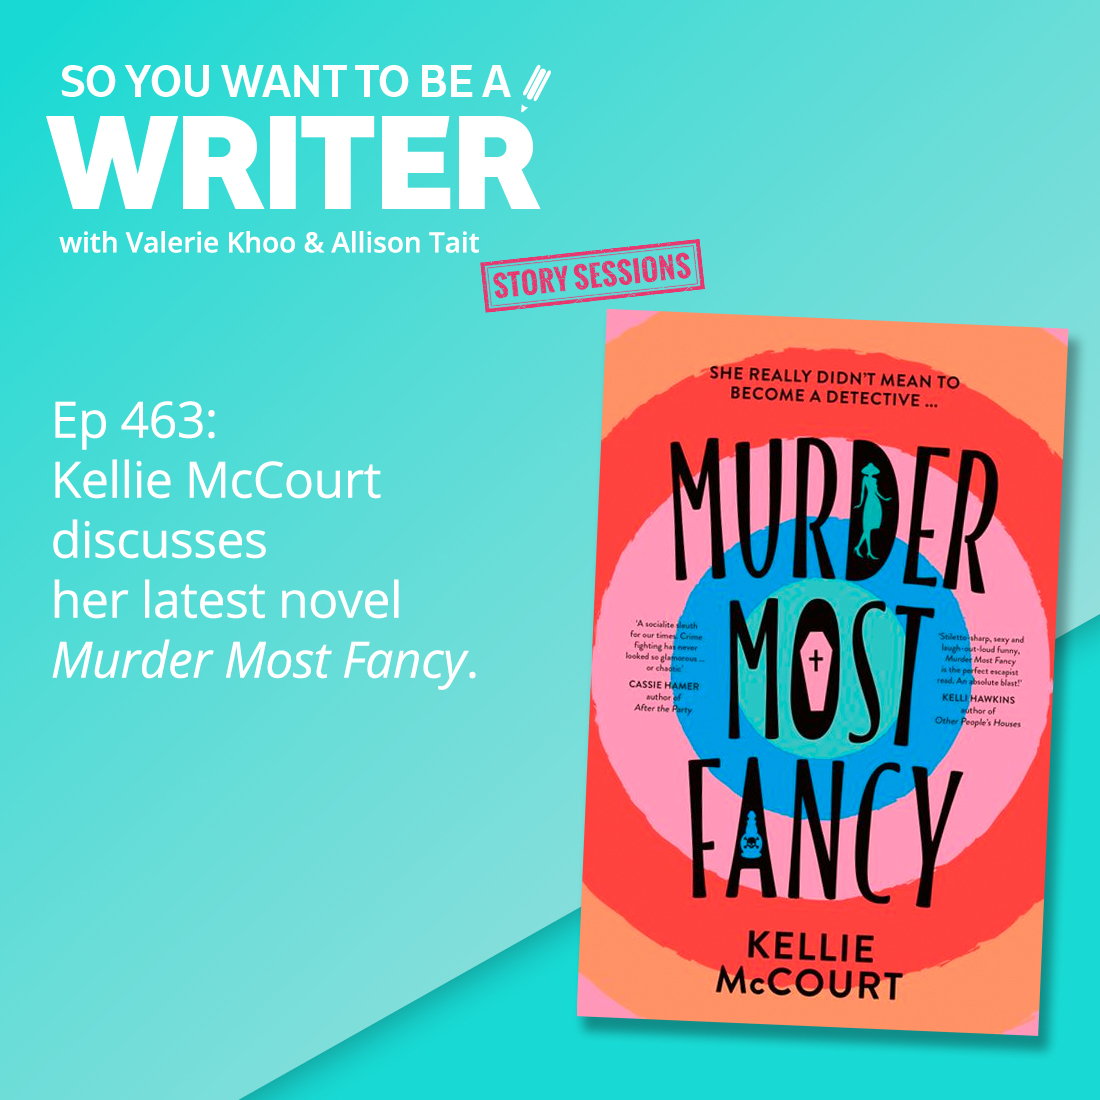 WRITER 463: Kellie McCourt discusses her latest novel 'Murder Most Fancy' [Story Sessions series]